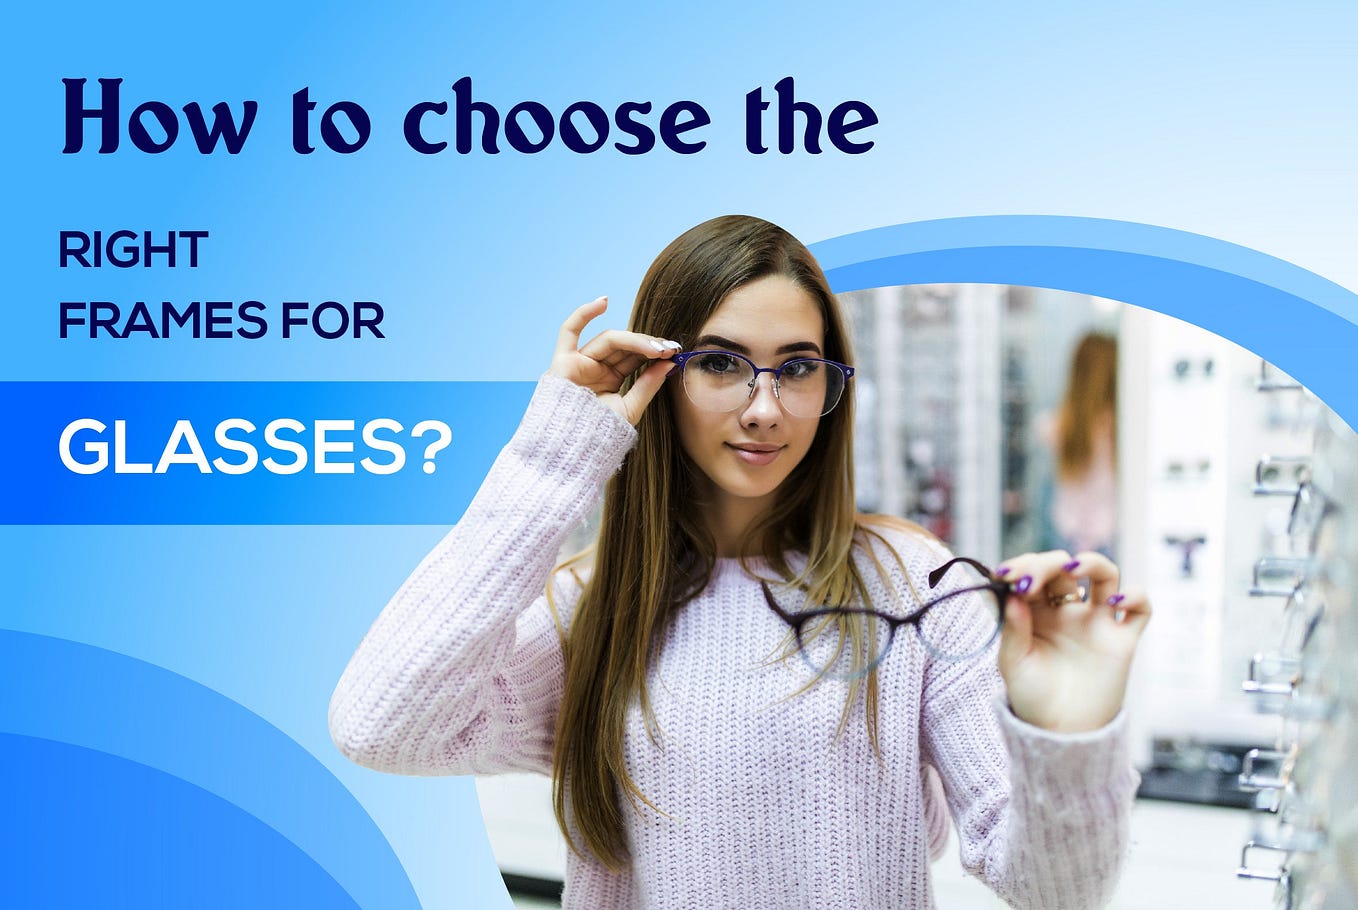 5 Reasons Why You Should be Wearing Blue Light Glasses